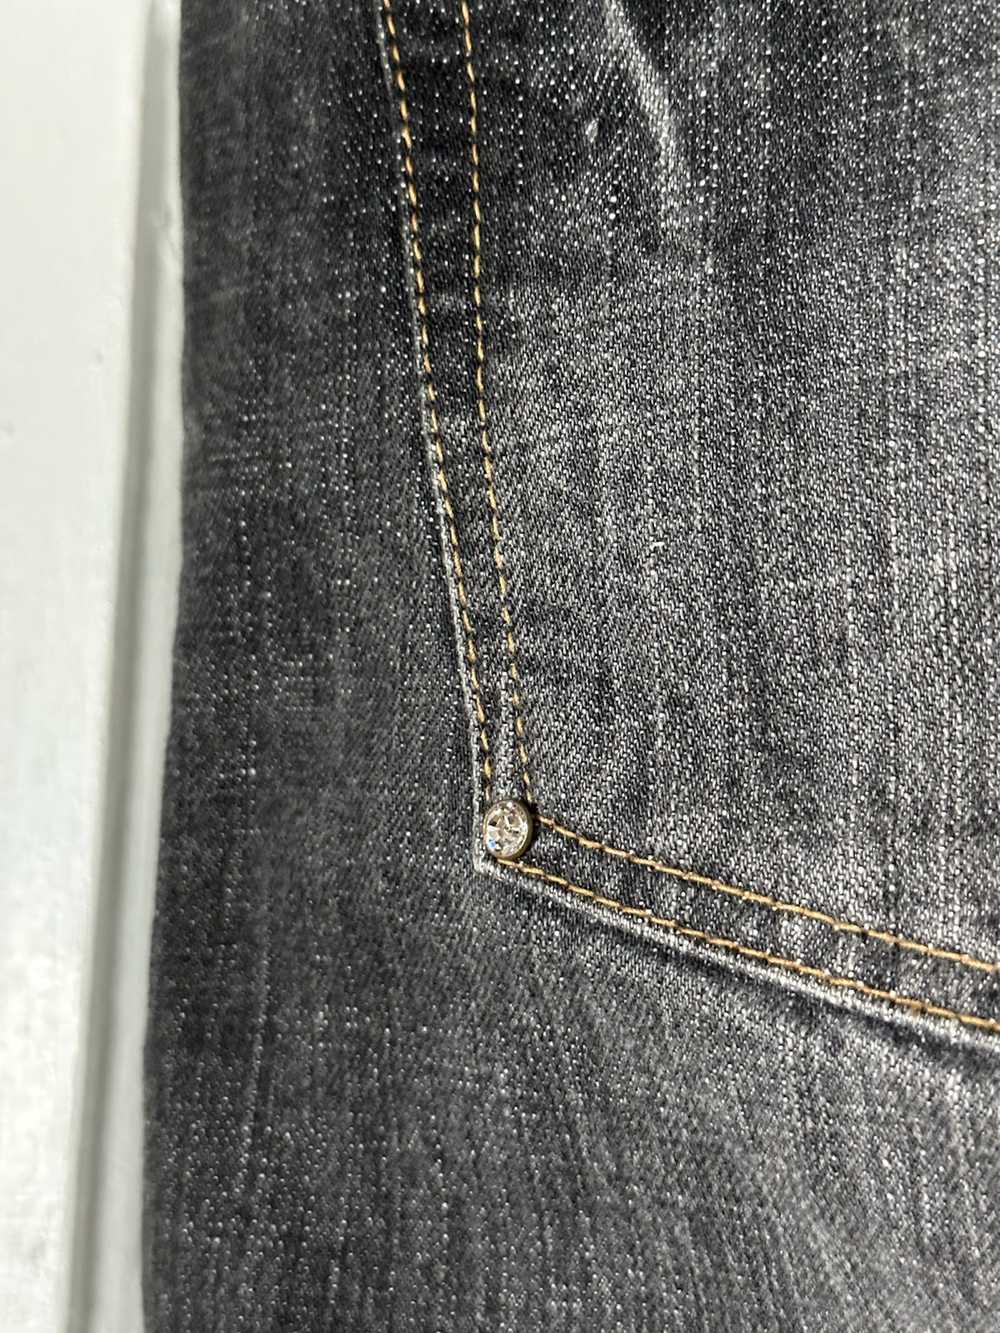 Swagger Swagger $32 Reptile Denim Jeans - image 6